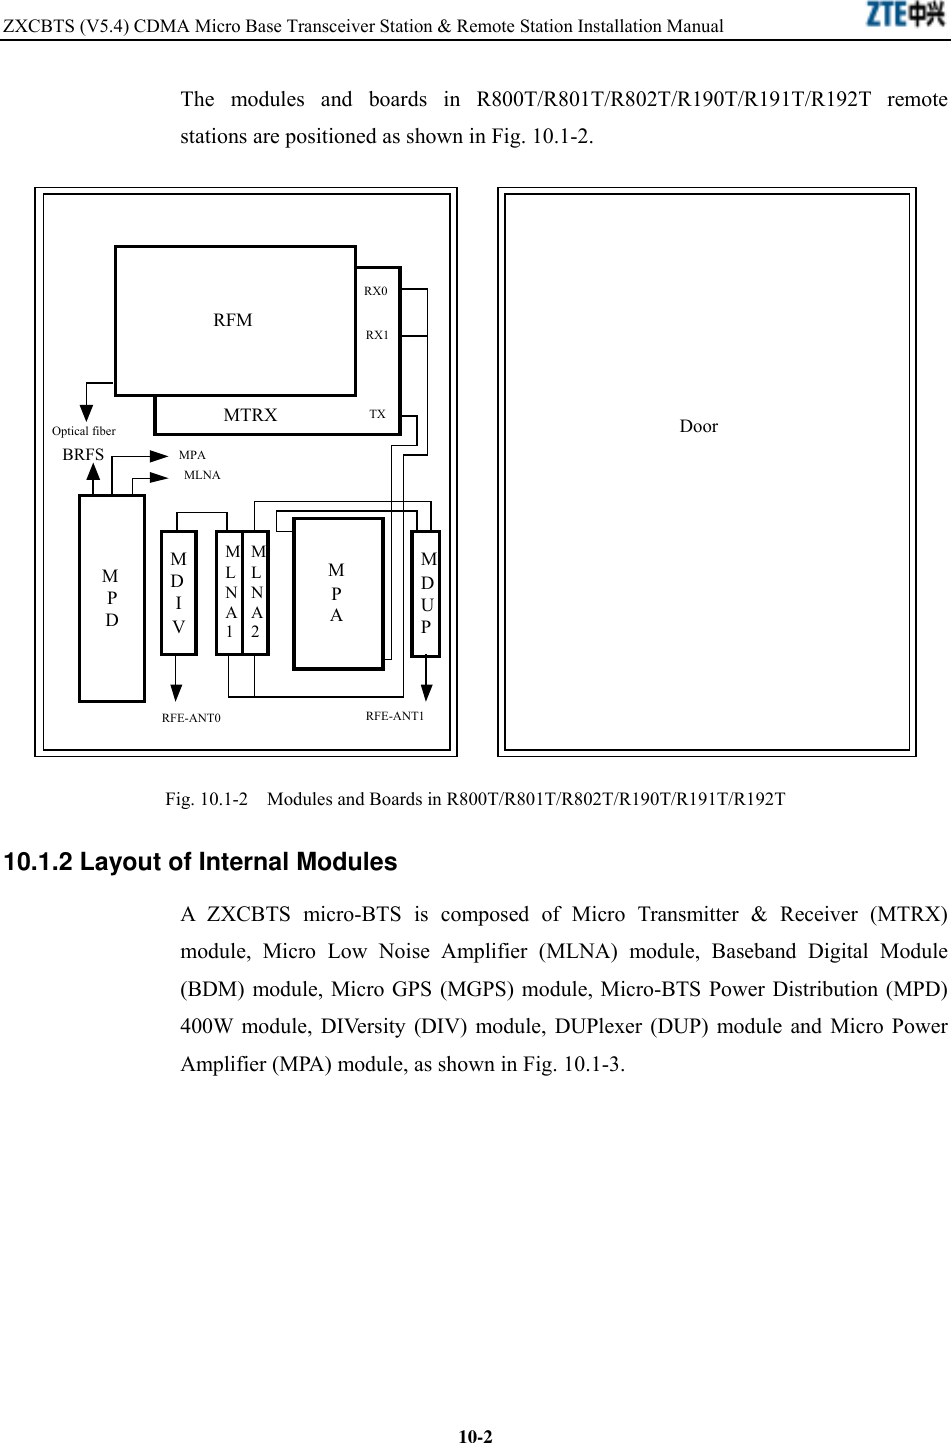 ZXCBTS (V5.4) CDMA Micro Base Transceiver Station &amp; Remote Station Installation Manual    10-2The modules and boards in R800T/R801T/R802T/R190T/R191T/R192T remote stations are positioned as shown in Fig. 10.1-2. RFMMPDMDIVMLNA1MLNA2MPAMDUPMLNAMPAMTRXRFE-ANT1TXRX0RX1RFE-ANT0DoorBRFSOptical fiber Fig. 10.1-2    Modules and Boards in R800T/R801T/R802T/R190T/R191T/R192T 10.1.2 Layout of Internal Modules A ZXCBTS micro-BTS is composed of Micro Transmitter &amp; Receiver (MTRX) module, Micro Low Noise Amplifier (MLNA) module, Baseband Digital Module (BDM) module, Micro GPS (MGPS) module, Micro-BTS Power Distribution (MPD) 400W module, DIVersity (DIV) module, DUPlexer (DUP) module and Micro Power Amplifier (MPA) module, as shown in Fig. 10.1-3. 